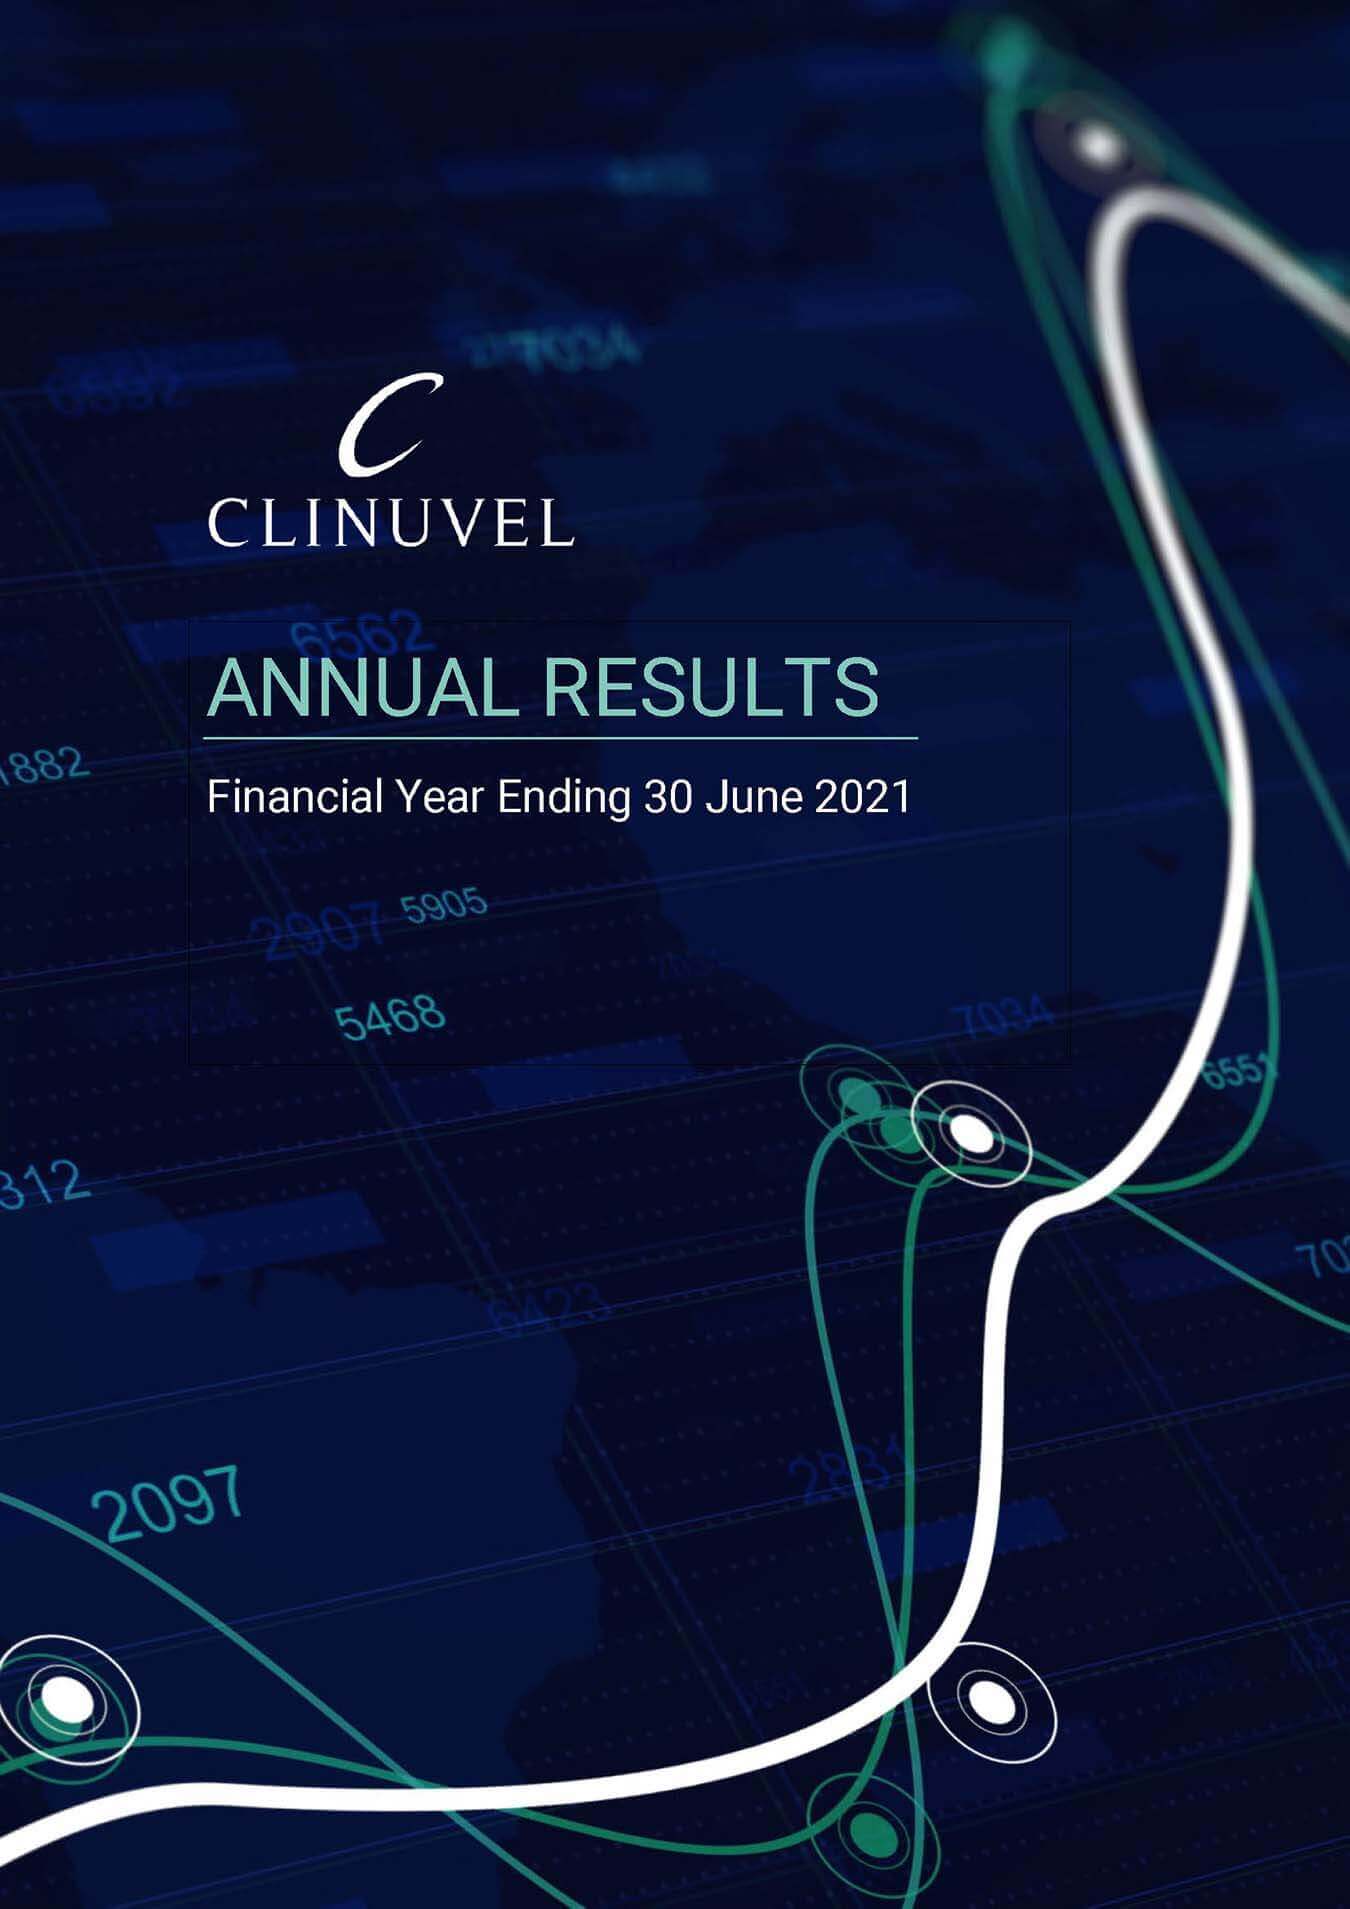 CLINUVEL Annual Results - Financial Year Ending 30 June 2021